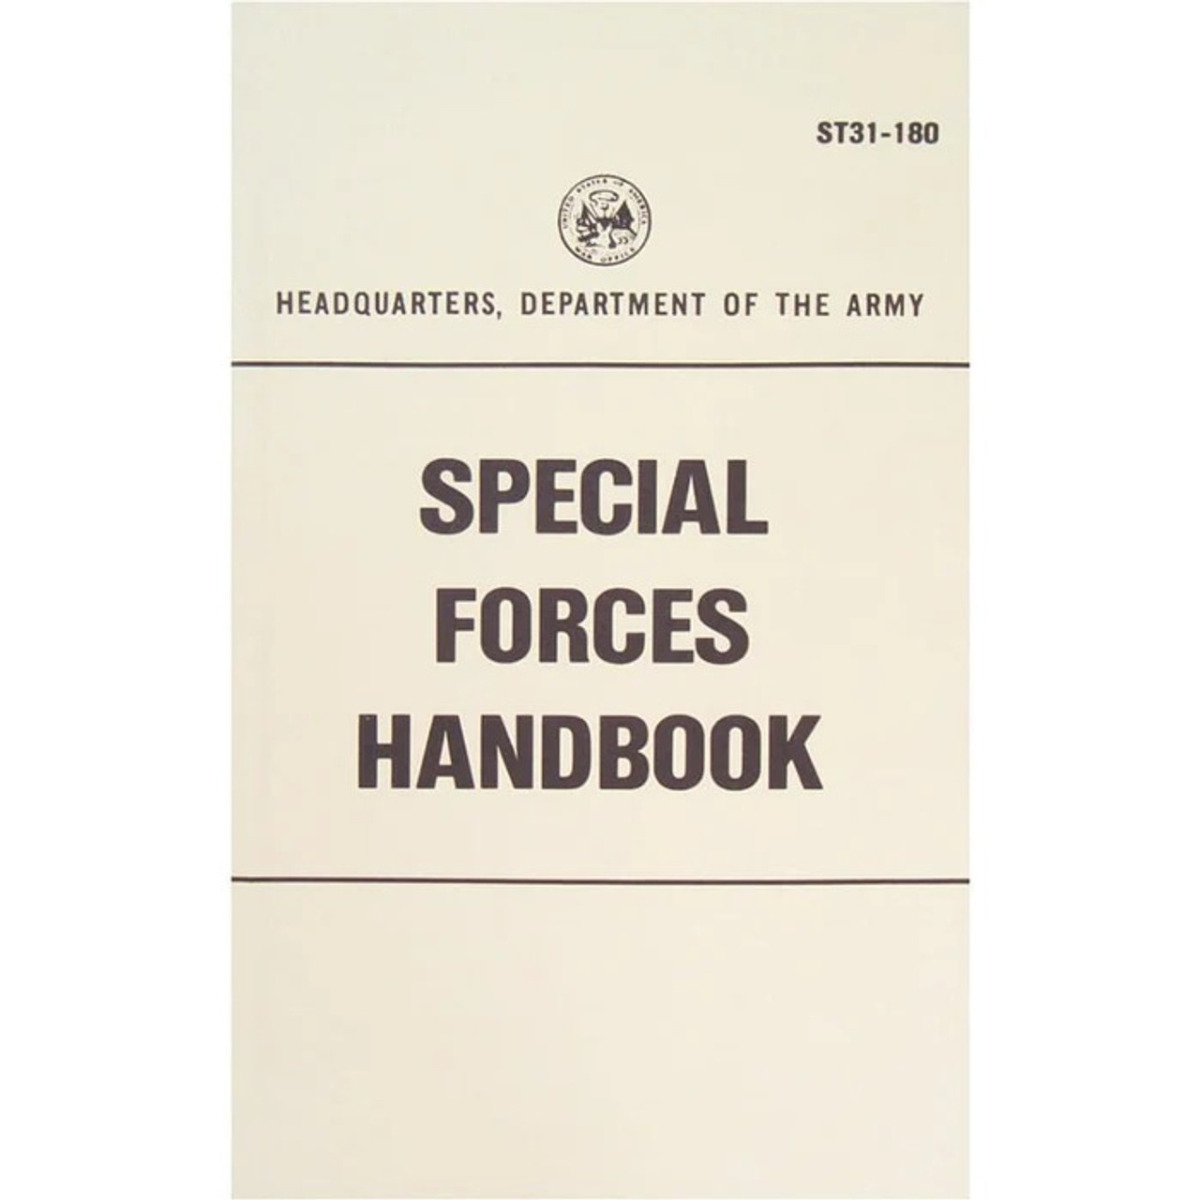 US Special Forces Handbook ST31-180